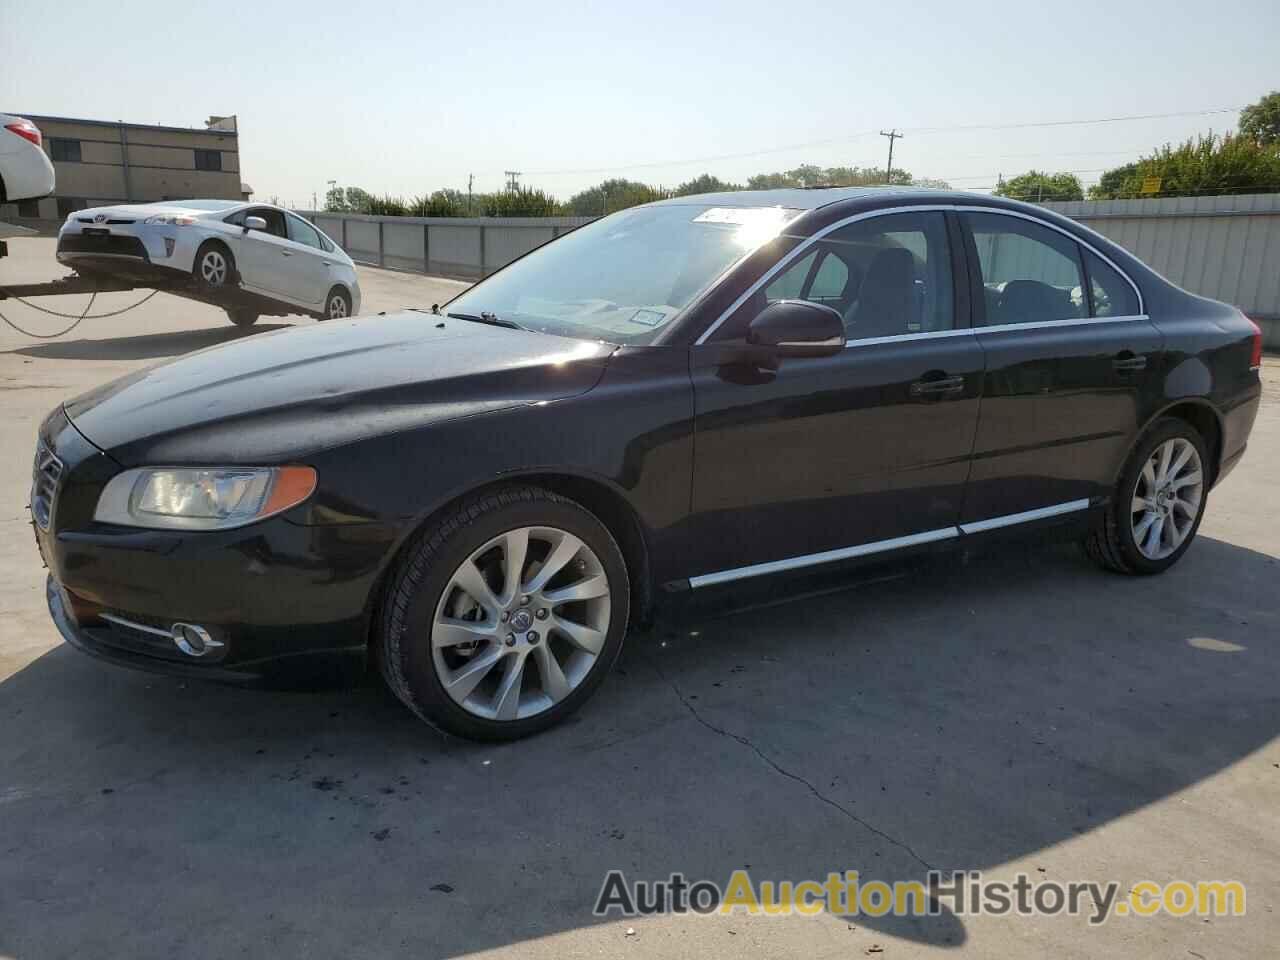 2013 VOLVO S80 3.2, YV1952AS0D1166775